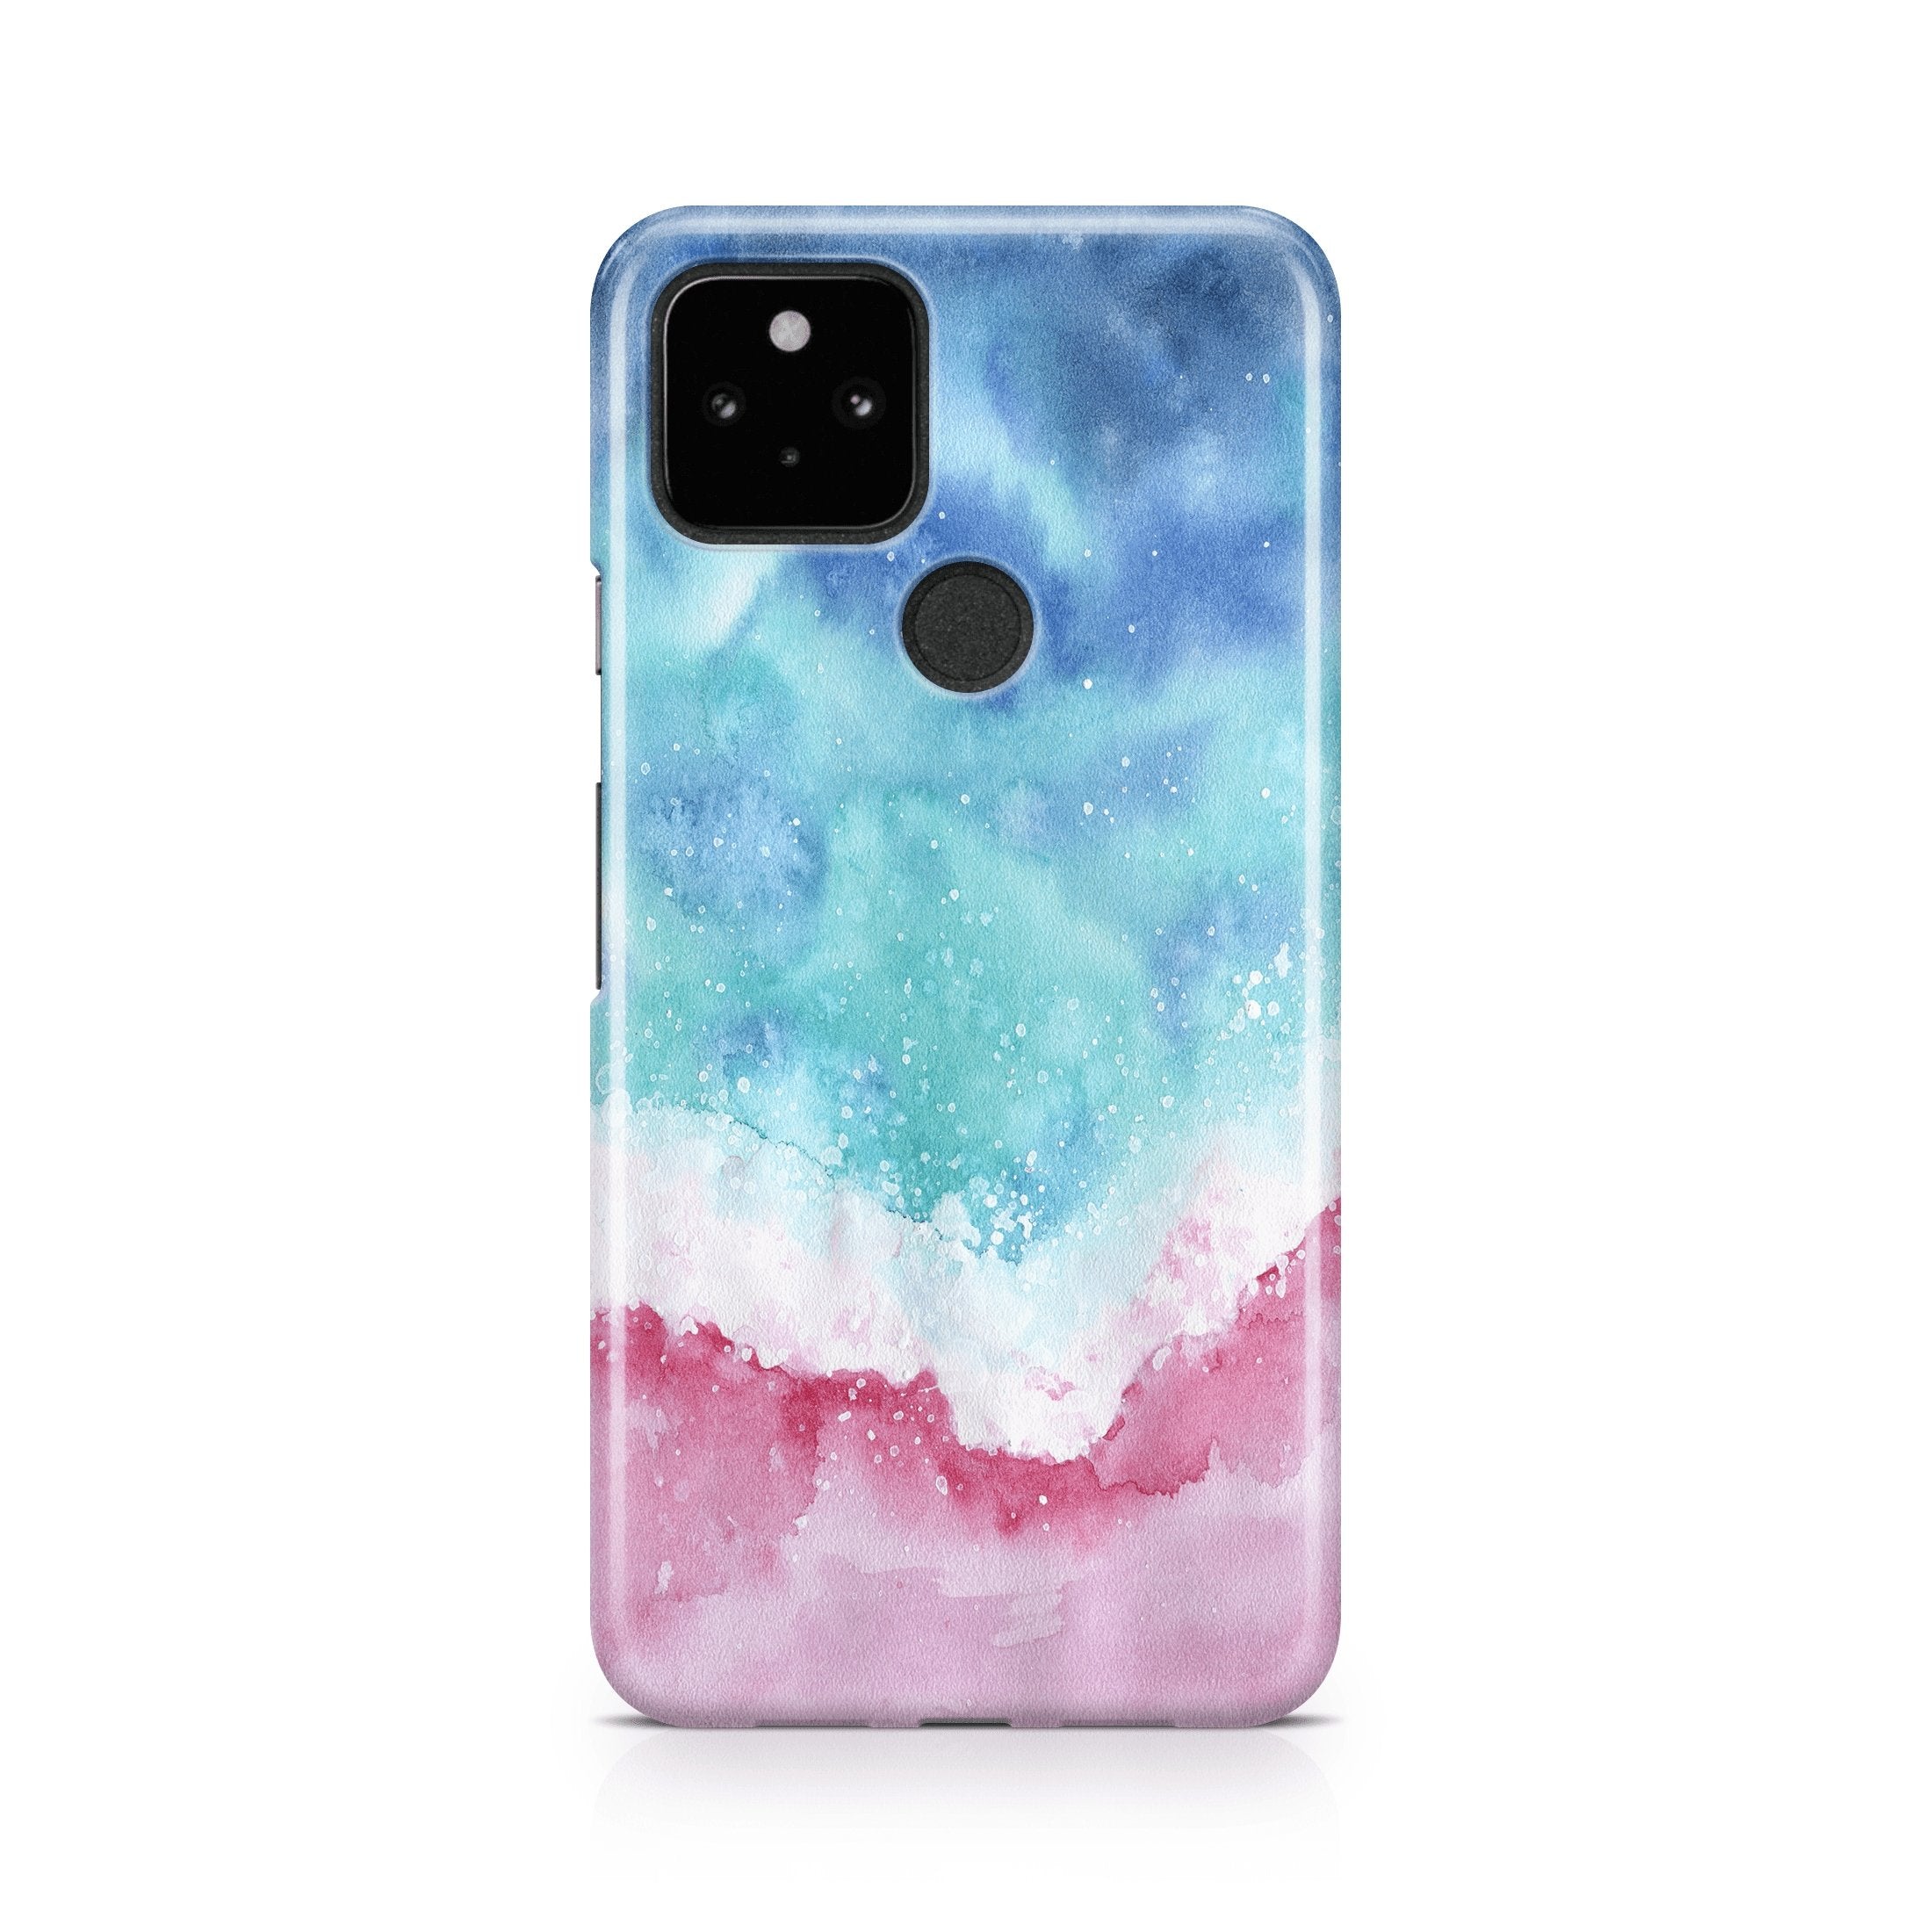 WaterColor Beach - Google phone case designs by CaseSwagger